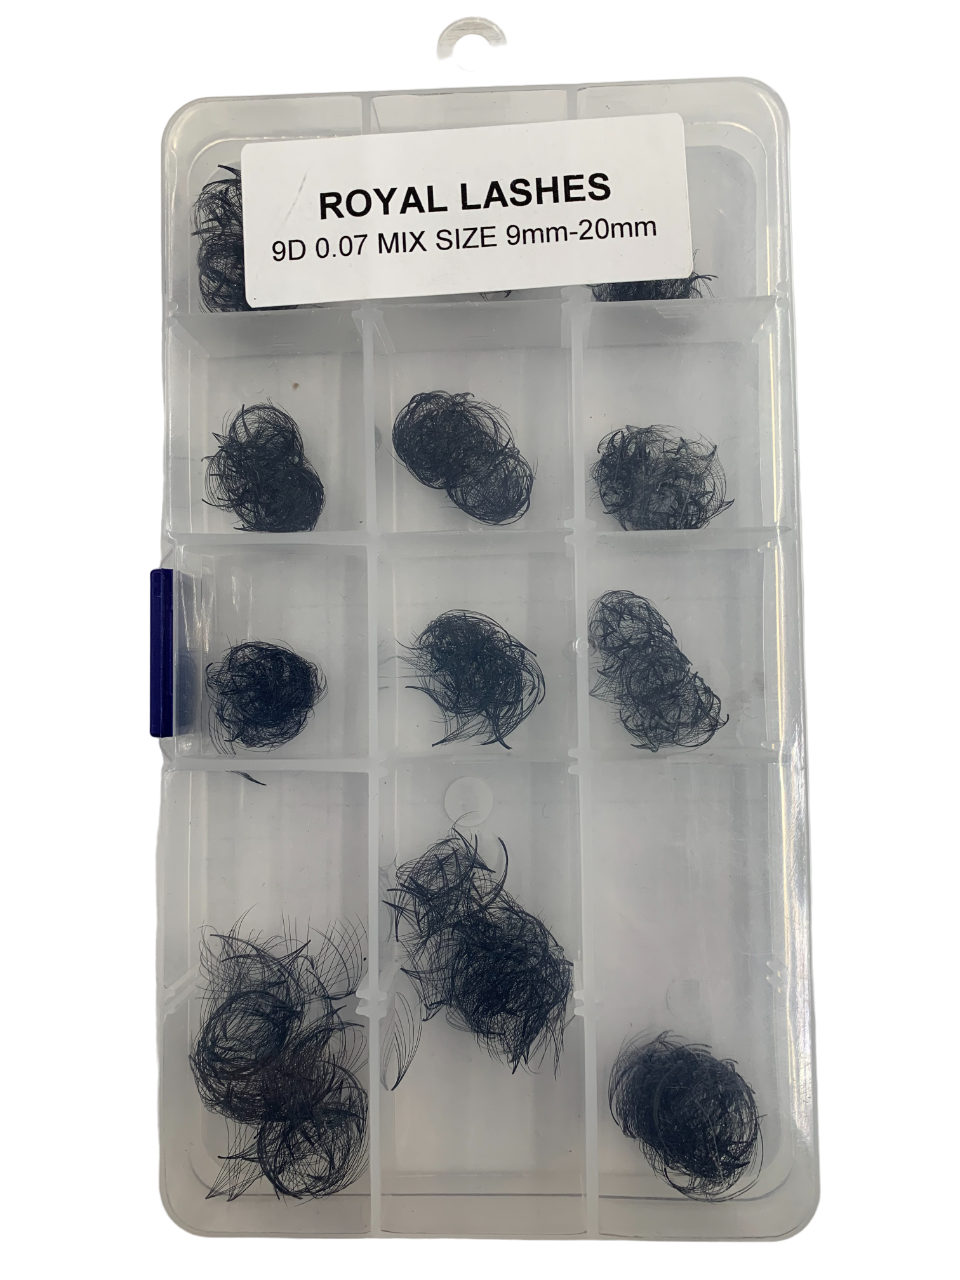 Royal Lashes 9D 0.07 Mix Size 9mm-20mm